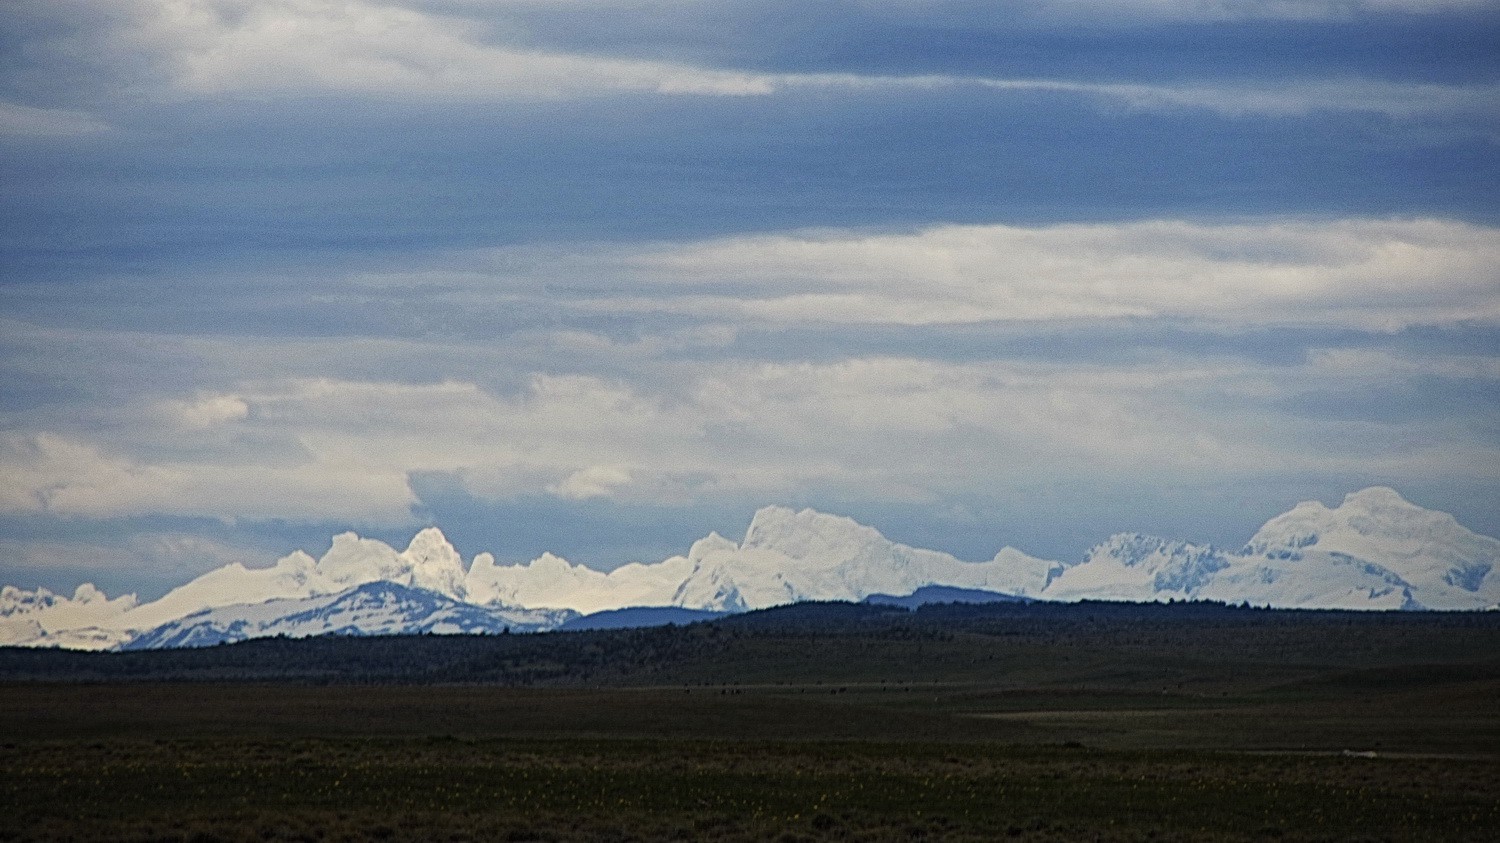 Back in the Andes - View from the border Argentina / Chile East of Puerto Natales